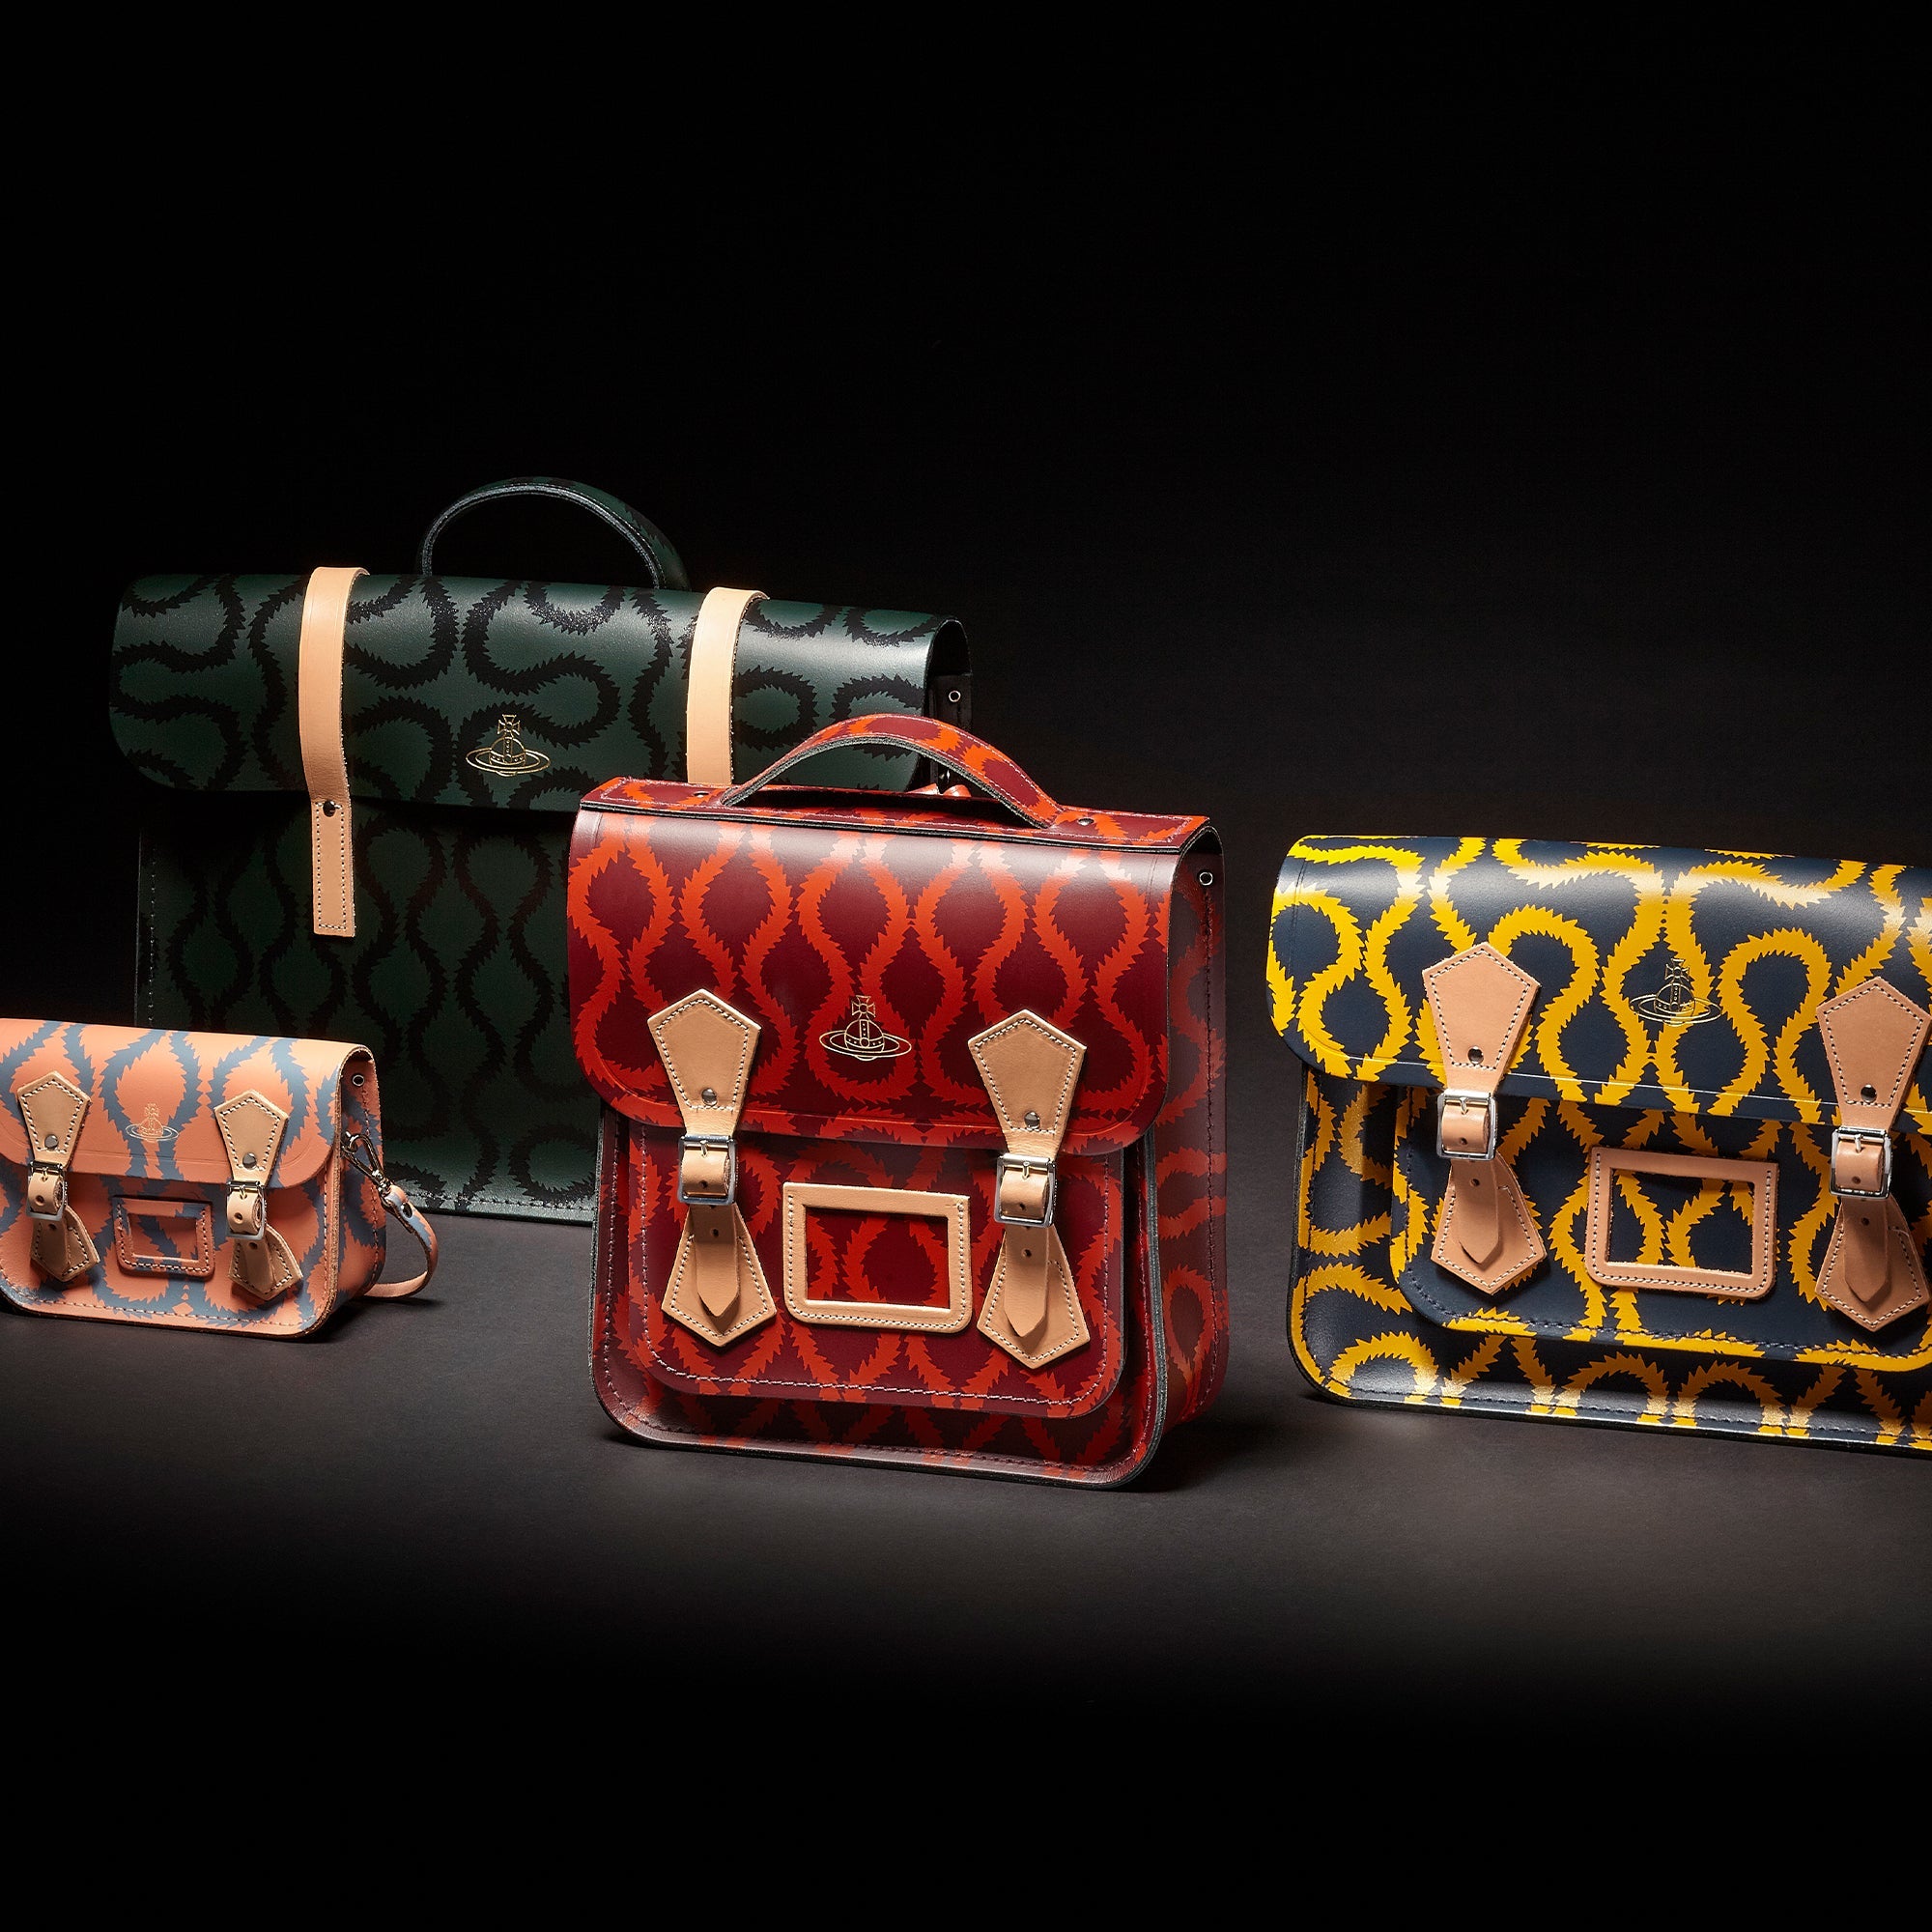 Vivienne Westwood x The Cambridge Satchel Co. - The Iconic Squiggle Sa